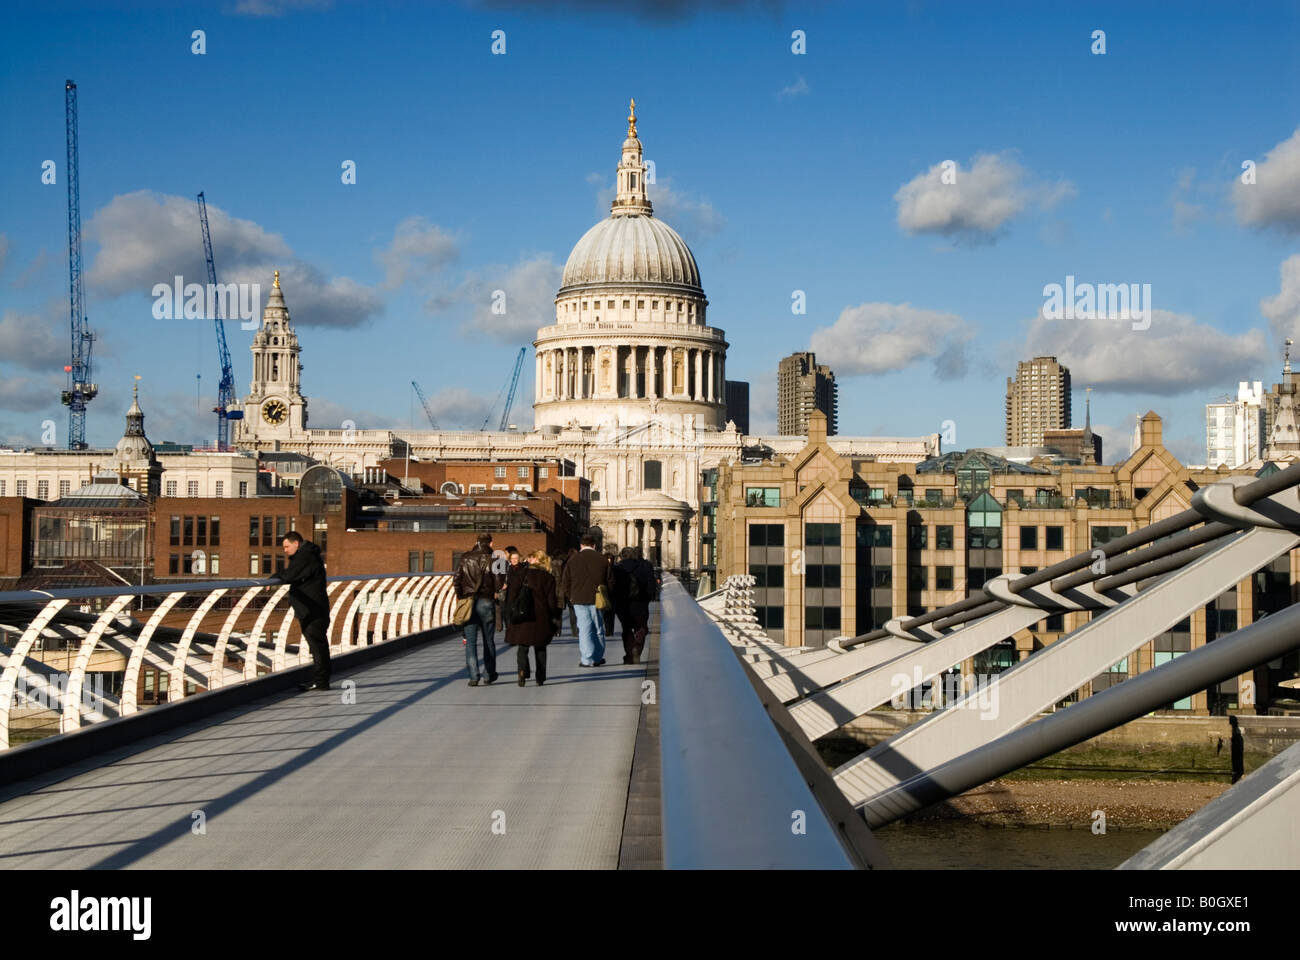 St Paul's Cathedral from the Millennium Bridge, London England UK Stock Photo